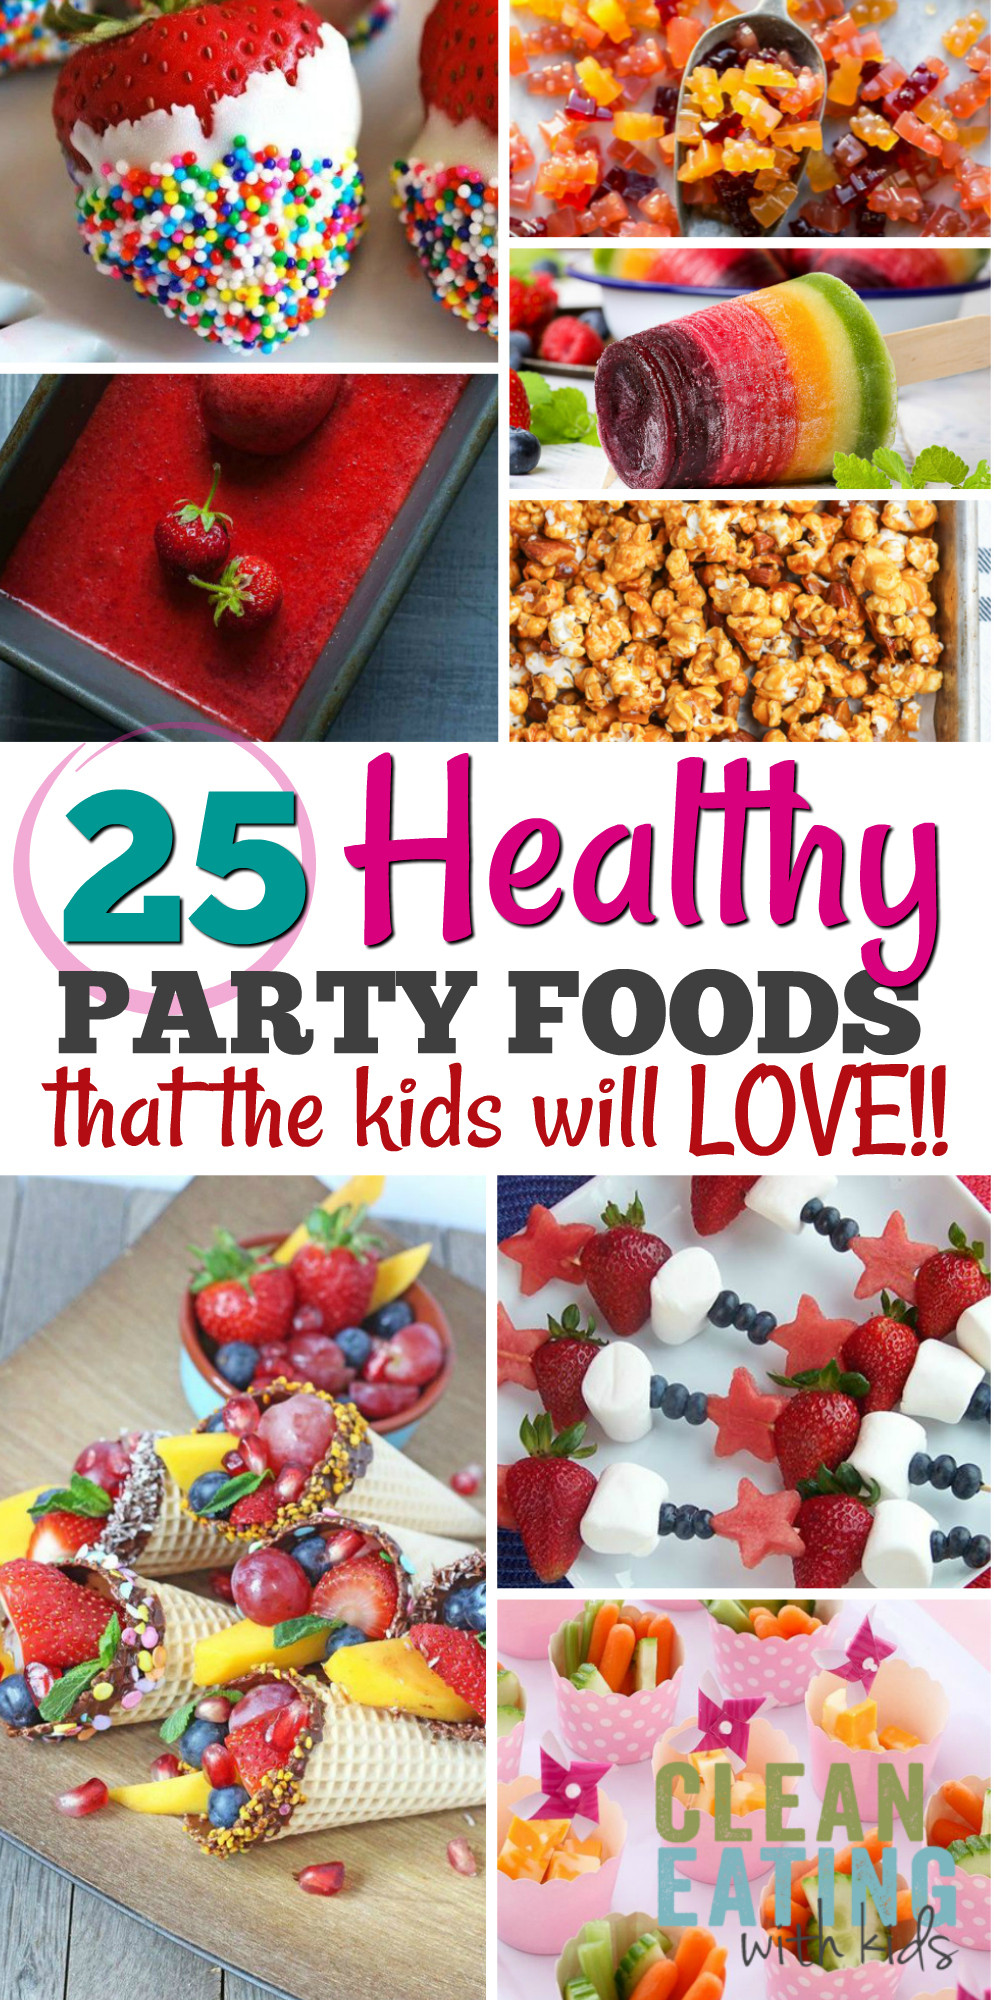 Party Snacks For Kids
 25 Healthy Birthday Party Food Ideas Clean Eating with kids